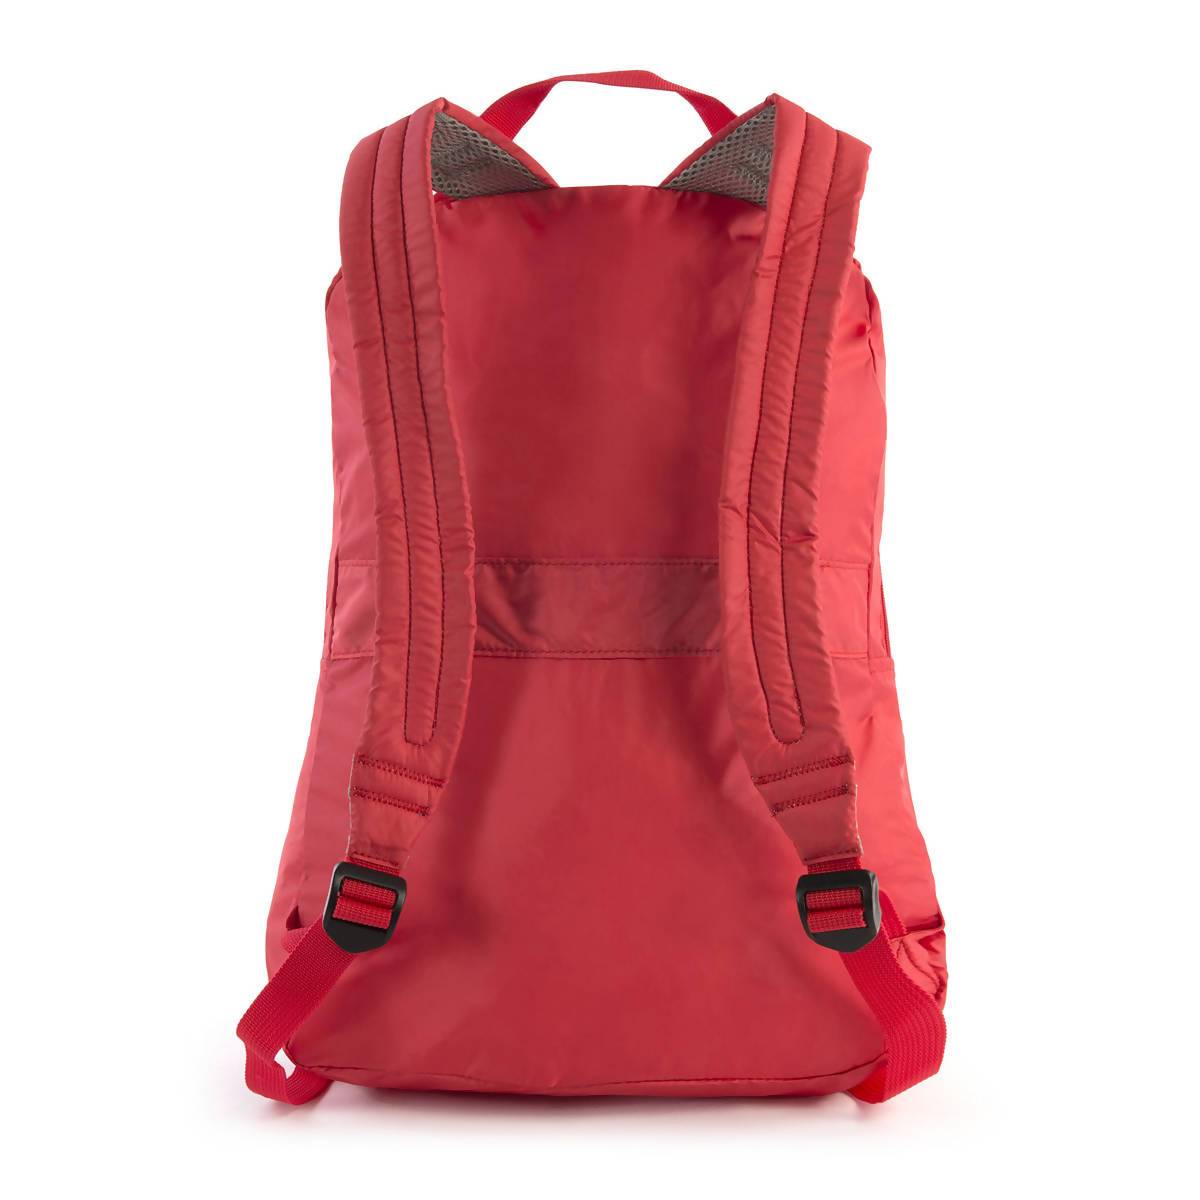 Compact Foldable Backpack Red / Green - New Arrivals - Zigzagme - Naiise